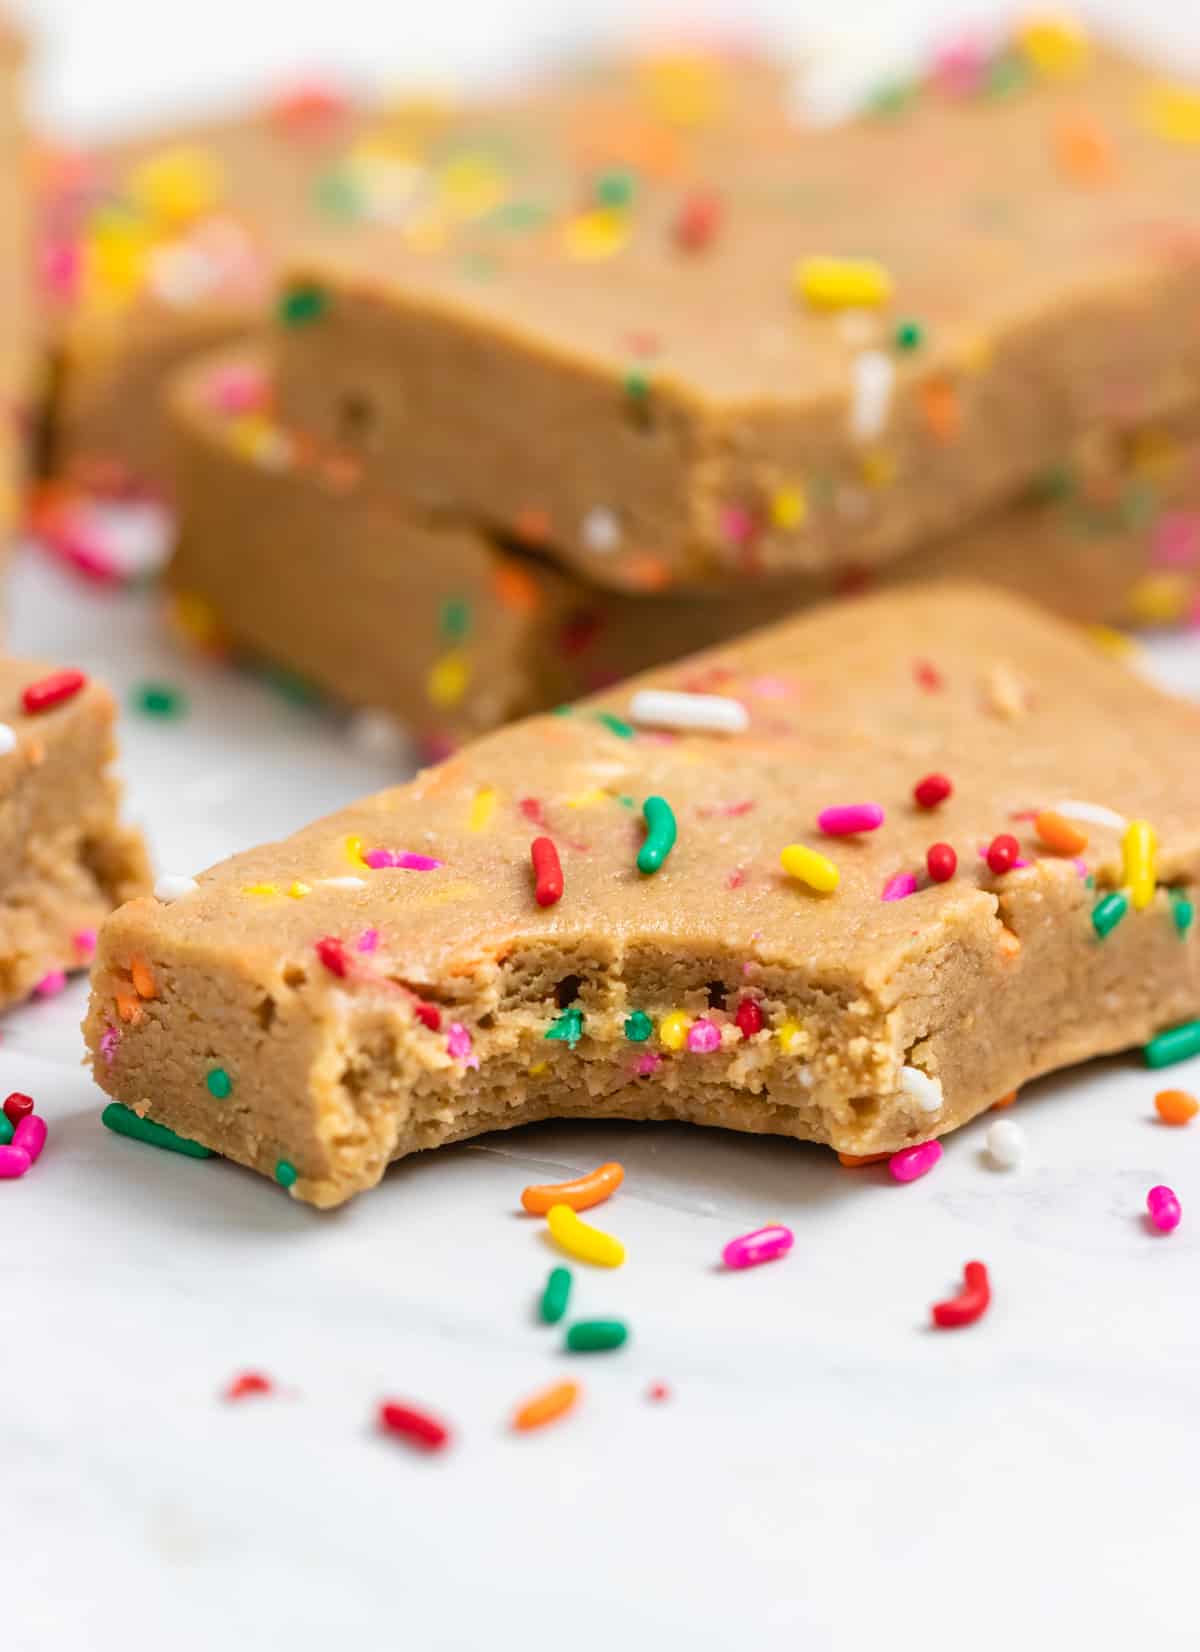 Bite shot of protein bar on counter with rainbow sprinkles.